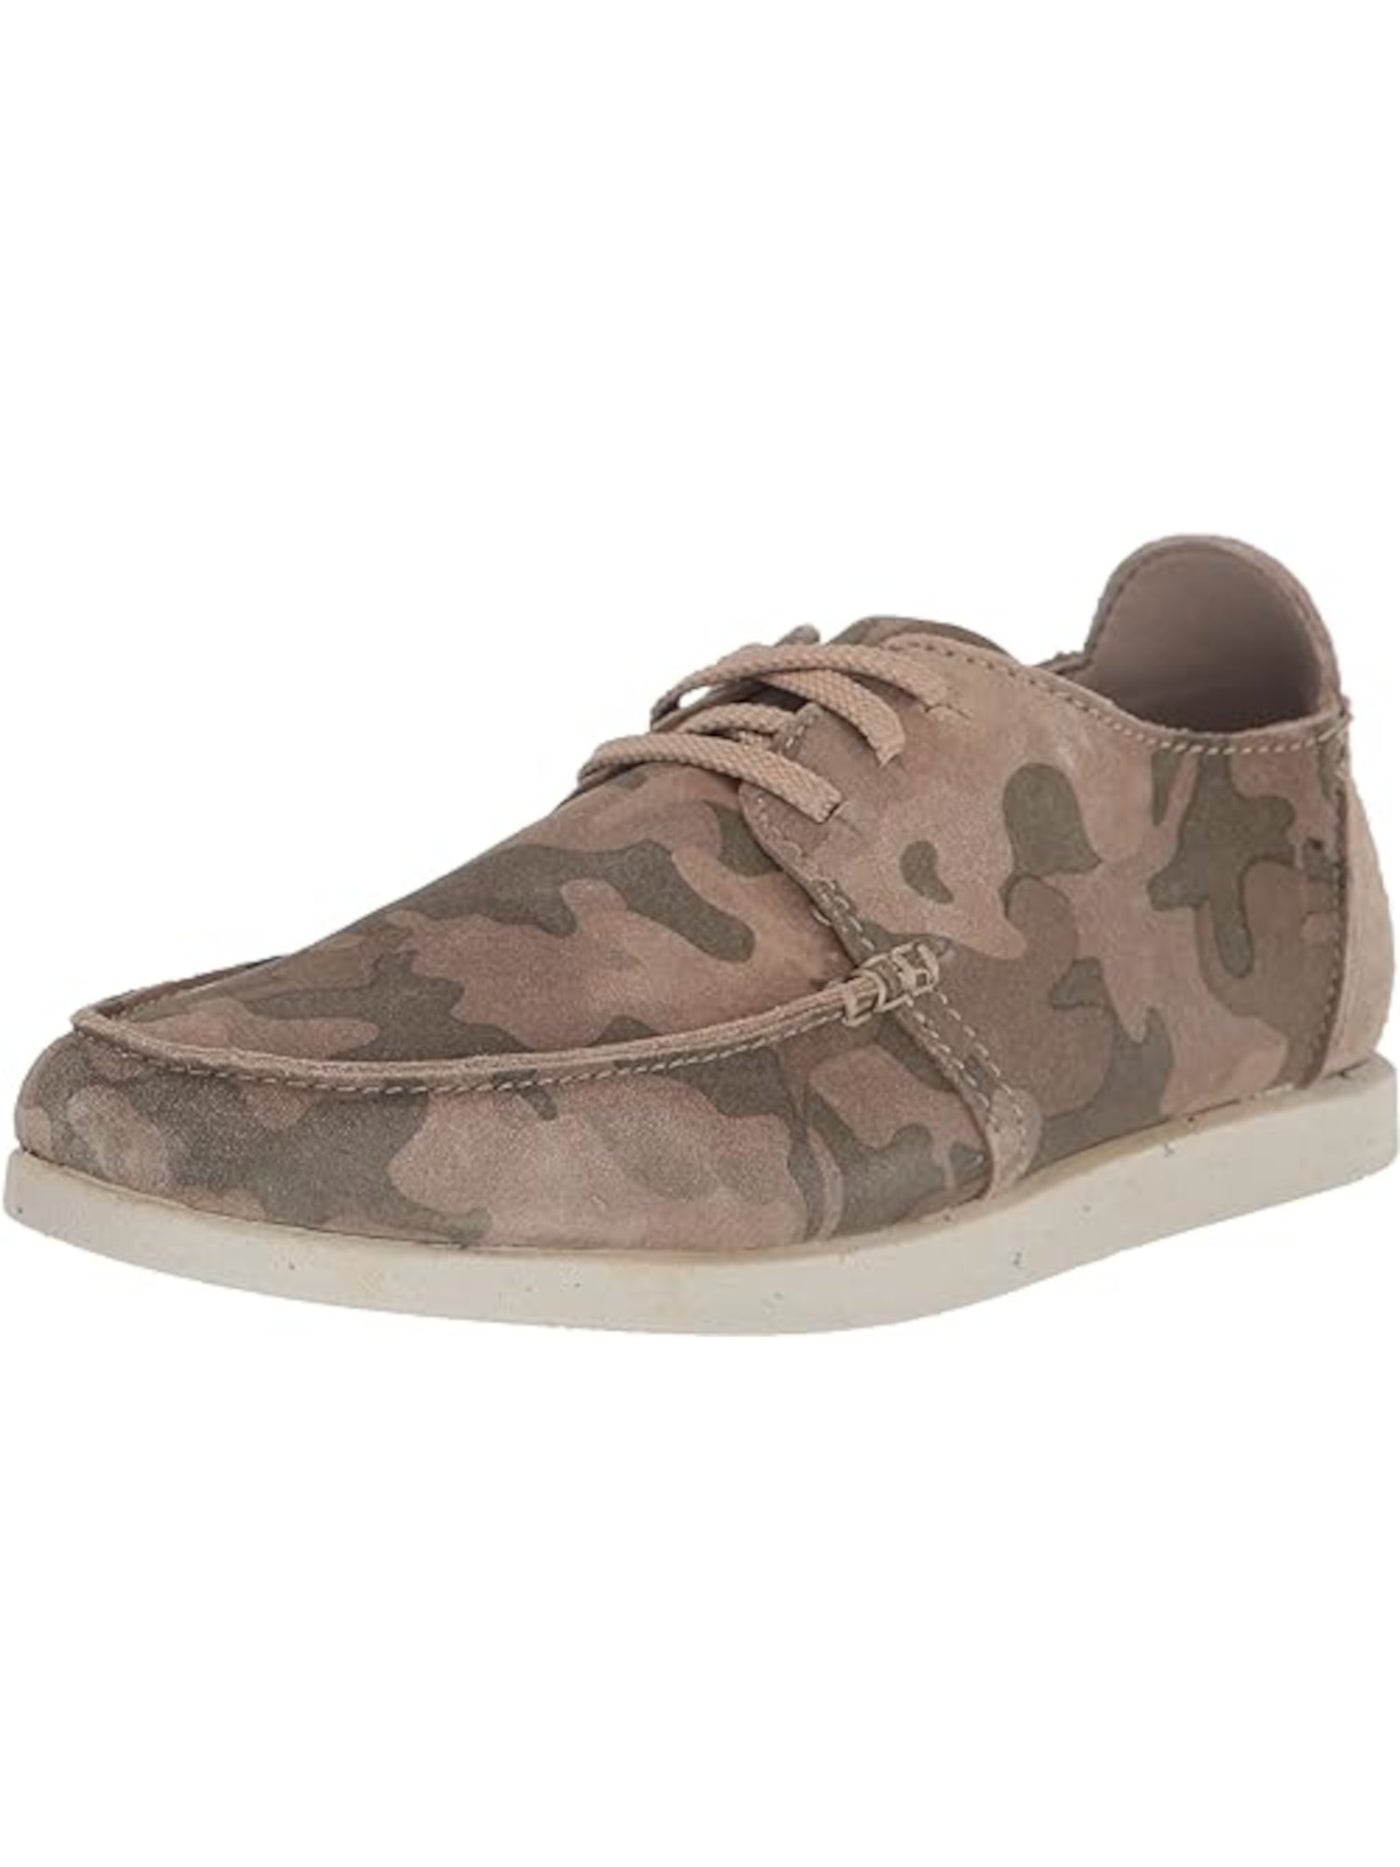 CLARKS COLLECTION Mens Beige Camouflage Breathable Removable Insole Shacrelite Round Toe Lace-Up Leather Sneakers Shoes 8.5 M